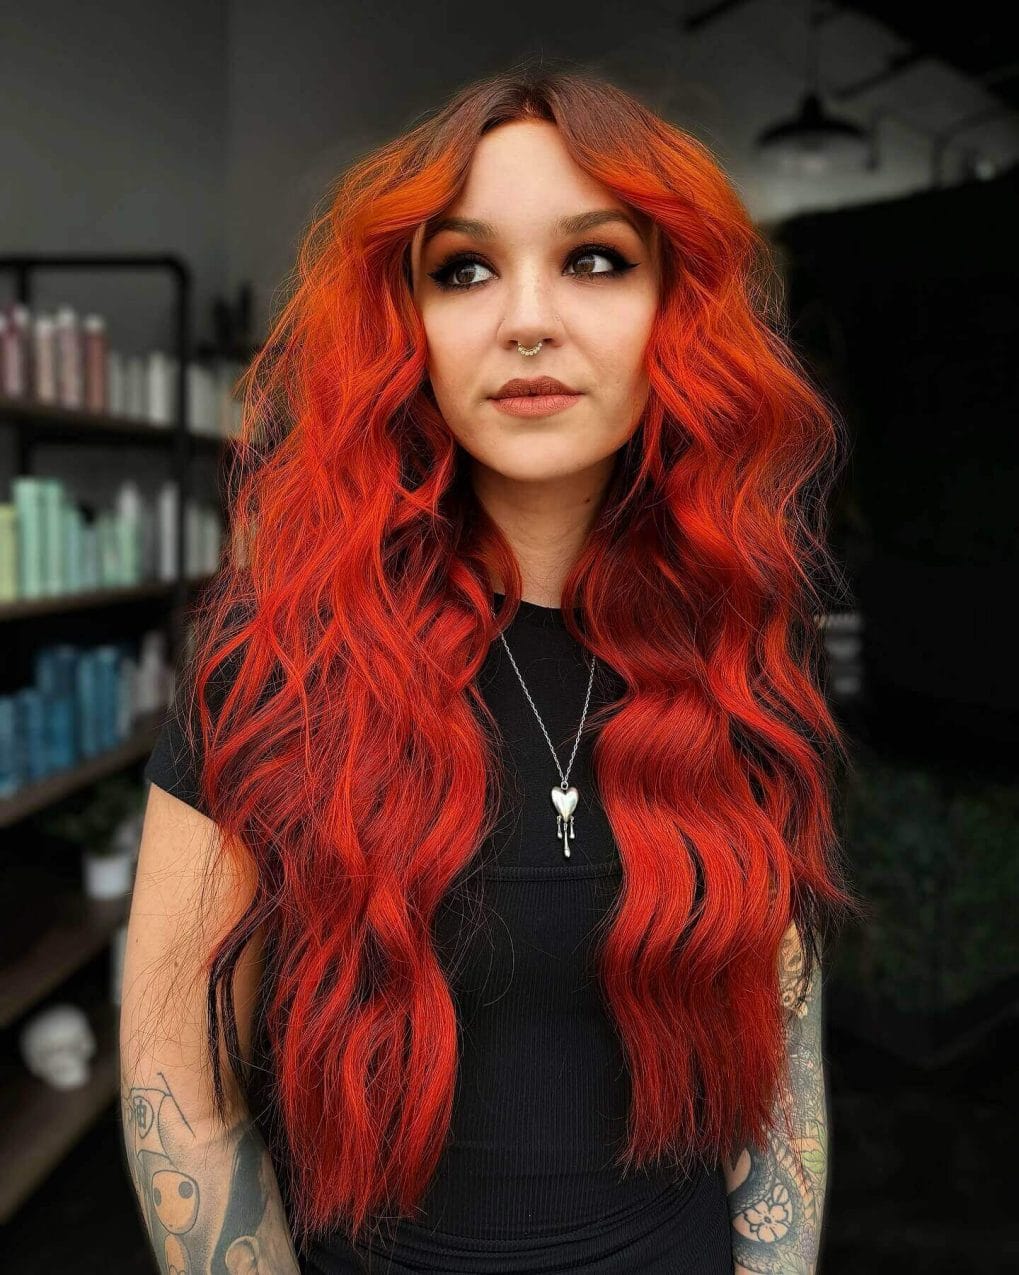 Bohemian summer festival vibes with deep red and orange waves